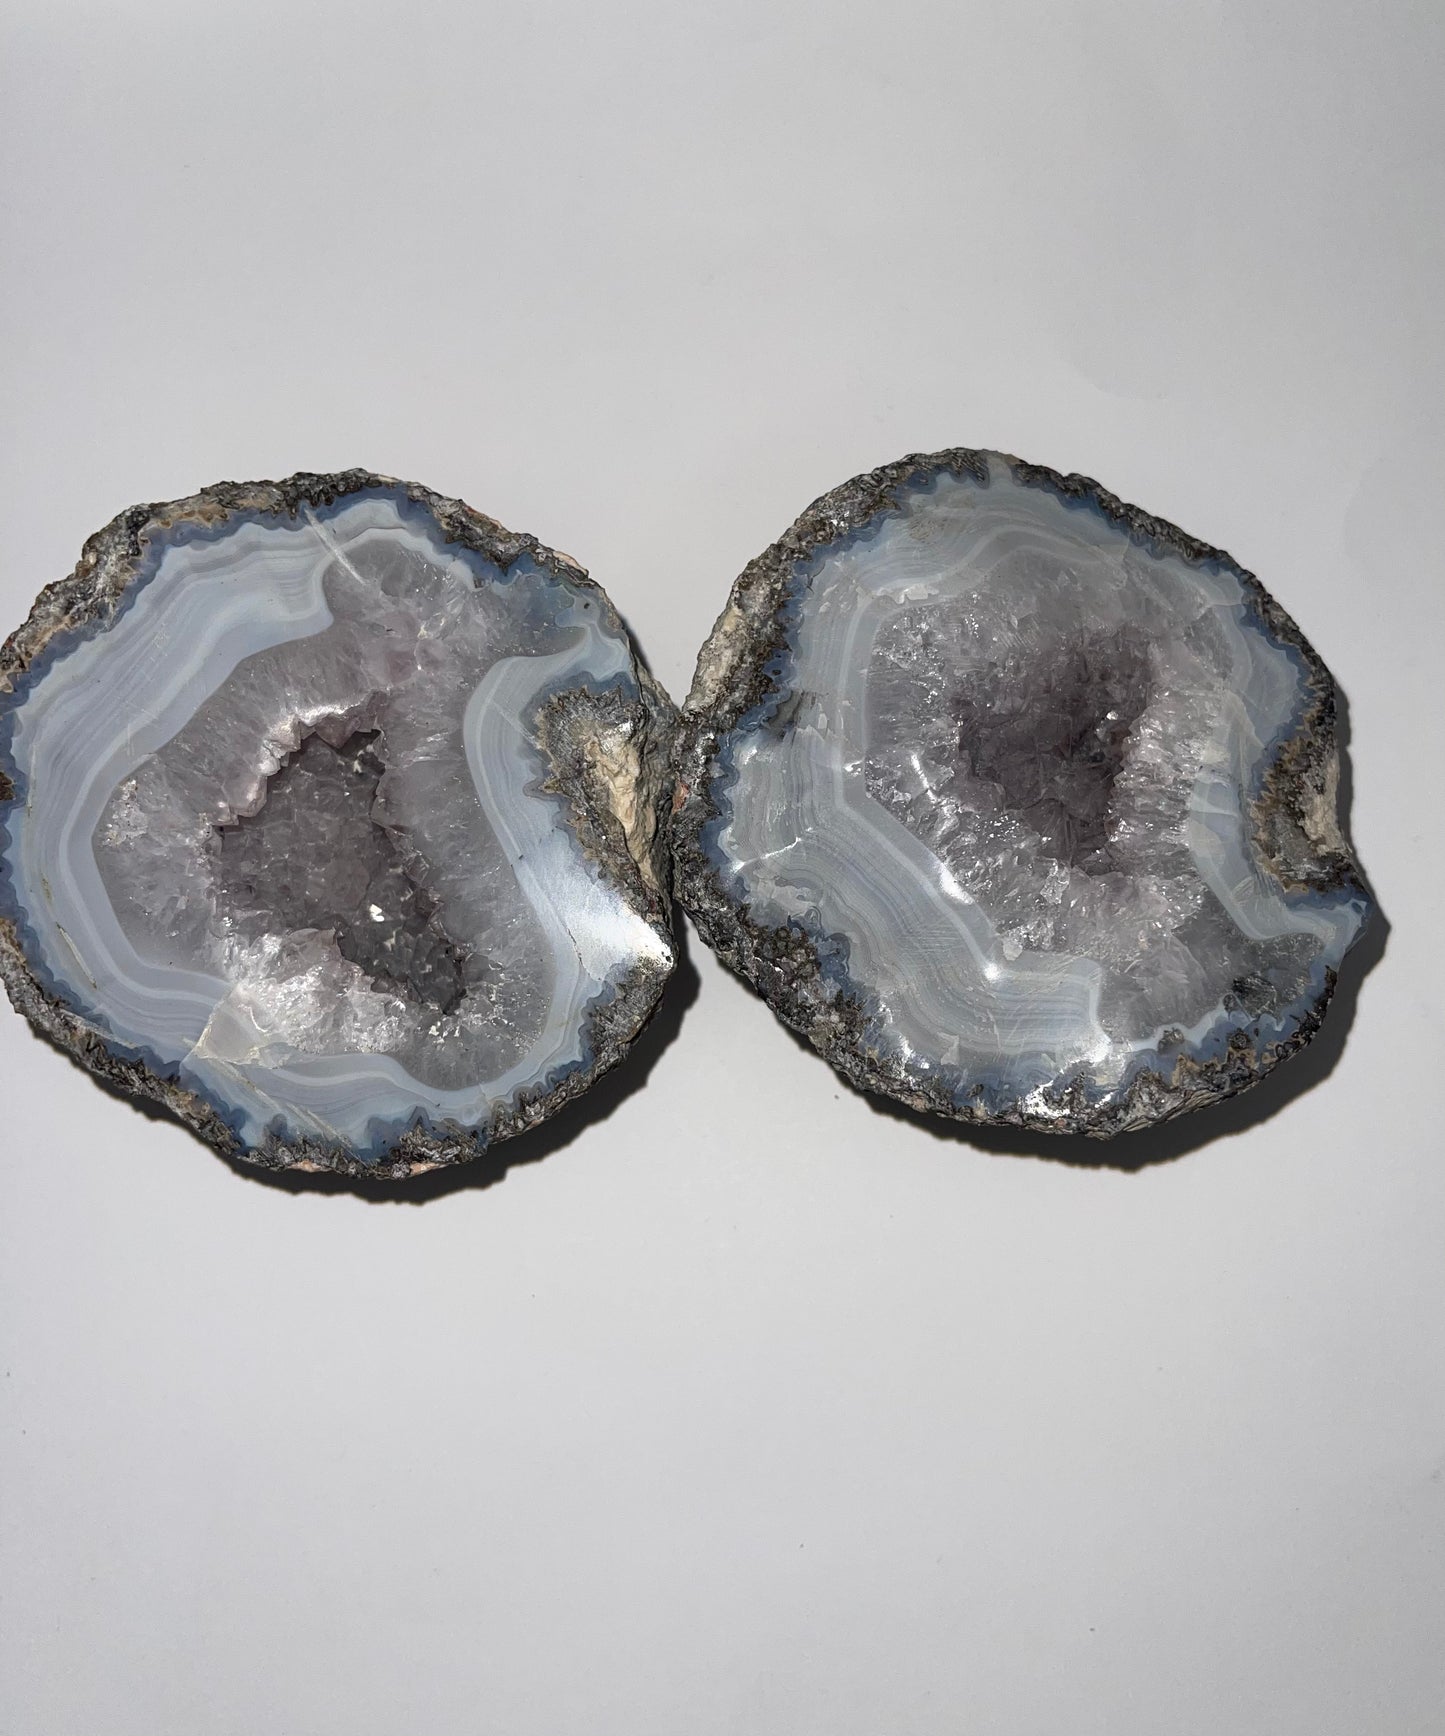 Raw blue lace agate geode half